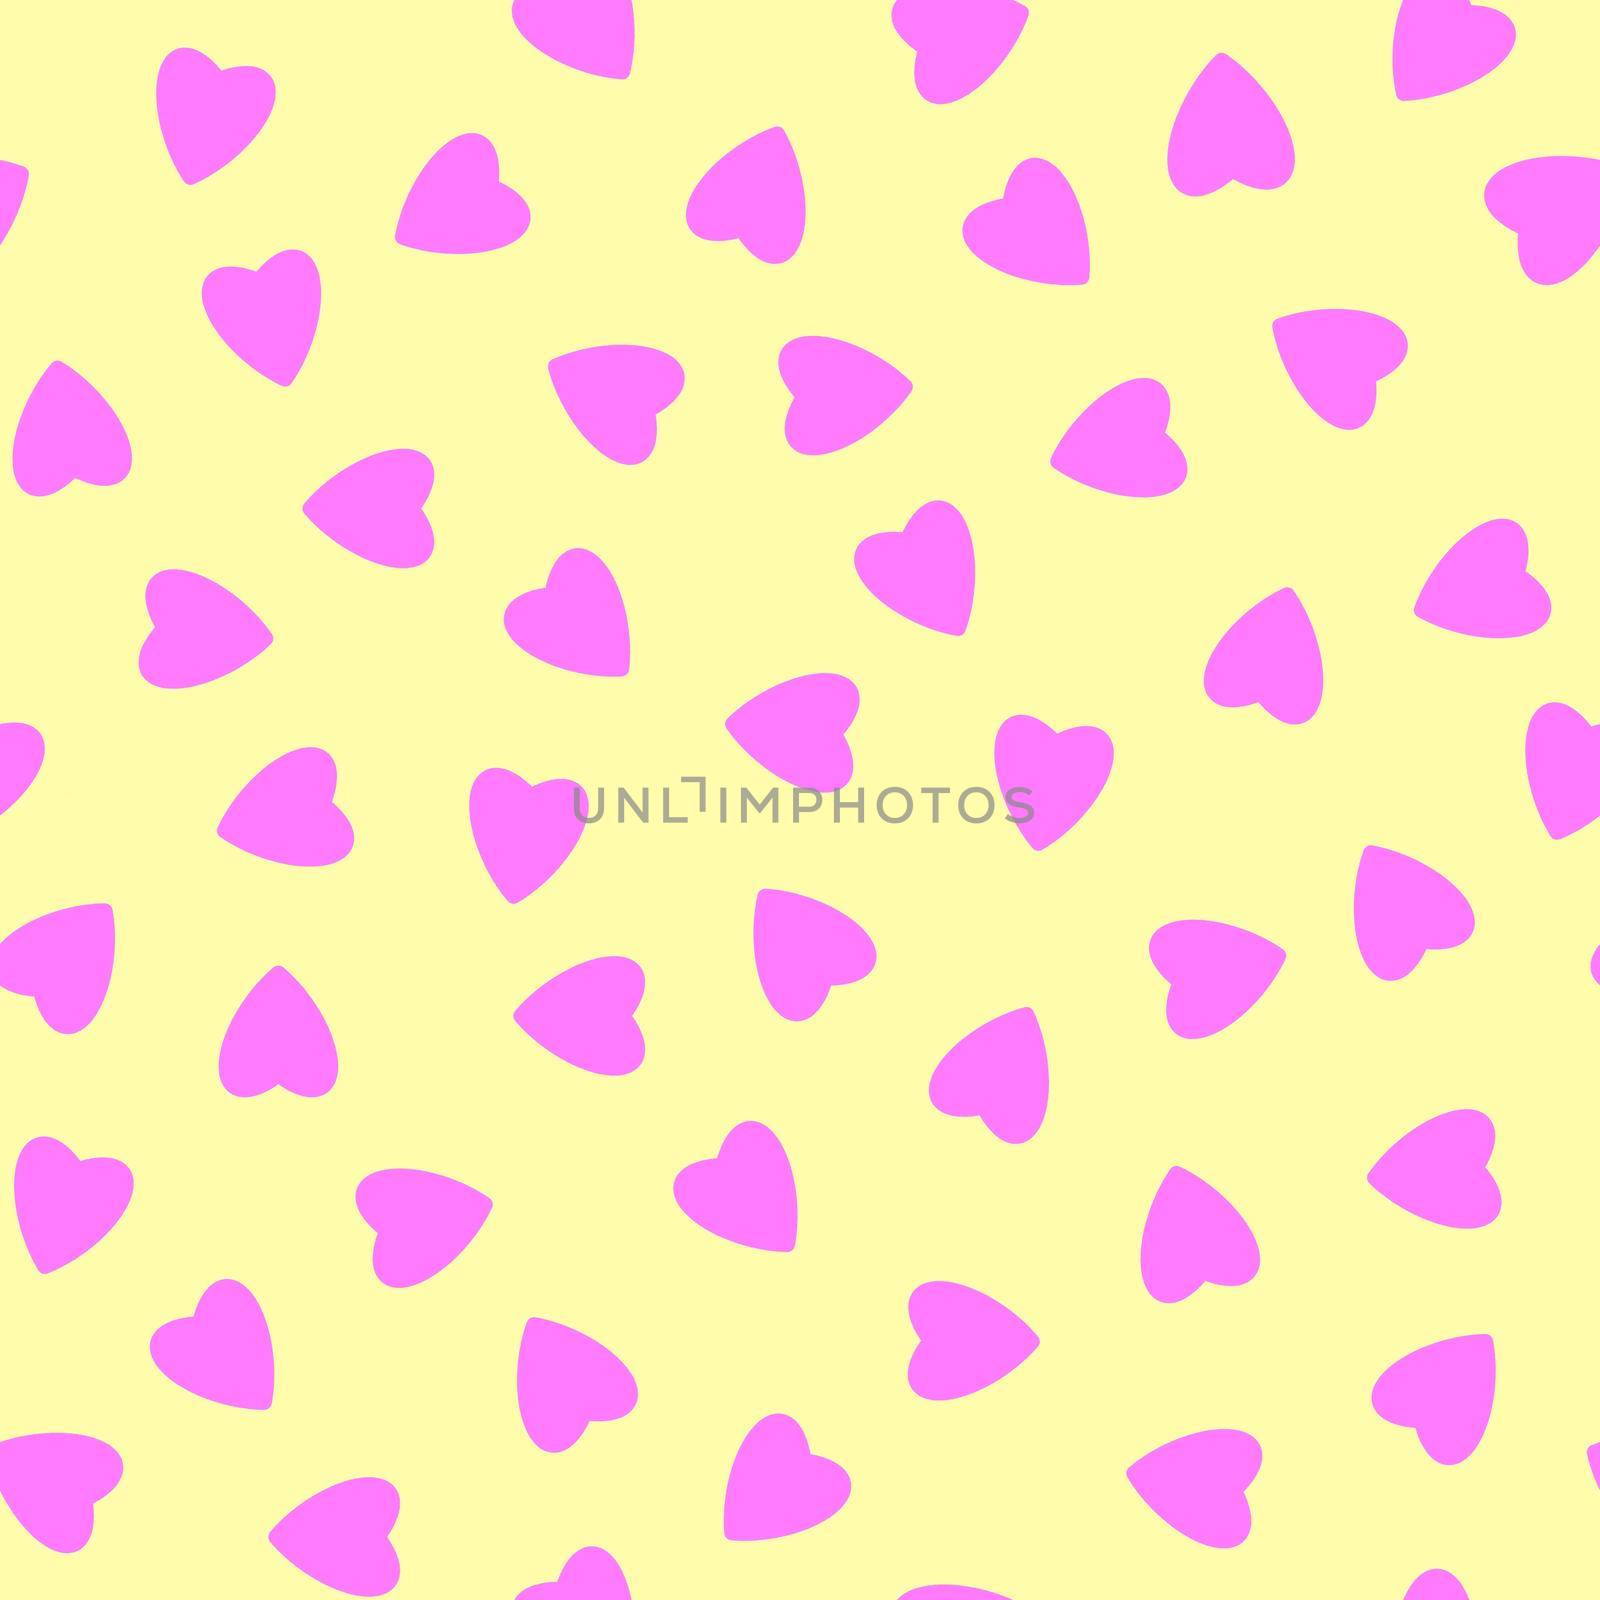 Simple hearts seamless pattern,endless chaotic texture made of tiny heart silhouettes.Valentines,mothers day background.Great for Easter,wedding,scrapbook,gift wrapping paper,textiles.Lilac on ivory.